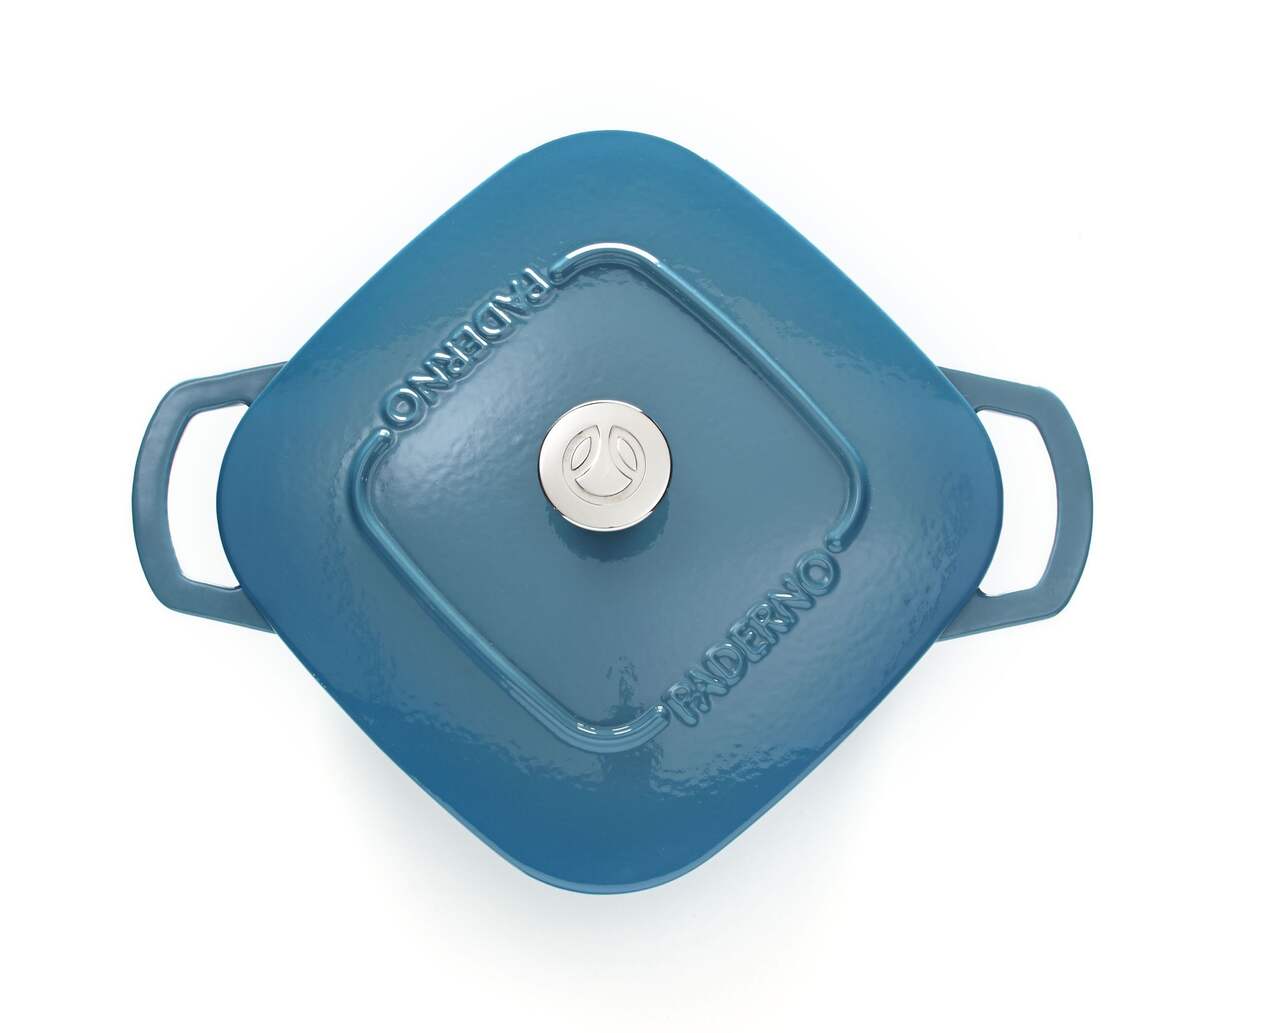 https://media-www.canadiantire.ca/product/living/kitchen/cookware/1423482/paderno-5-quart-dutch-oven-teal-a418e1a5-2e2a-4329-986e-13ca771fff52-jpgrendition.jpg?imdensity=1&imwidth=1244&impolicy=mZoom